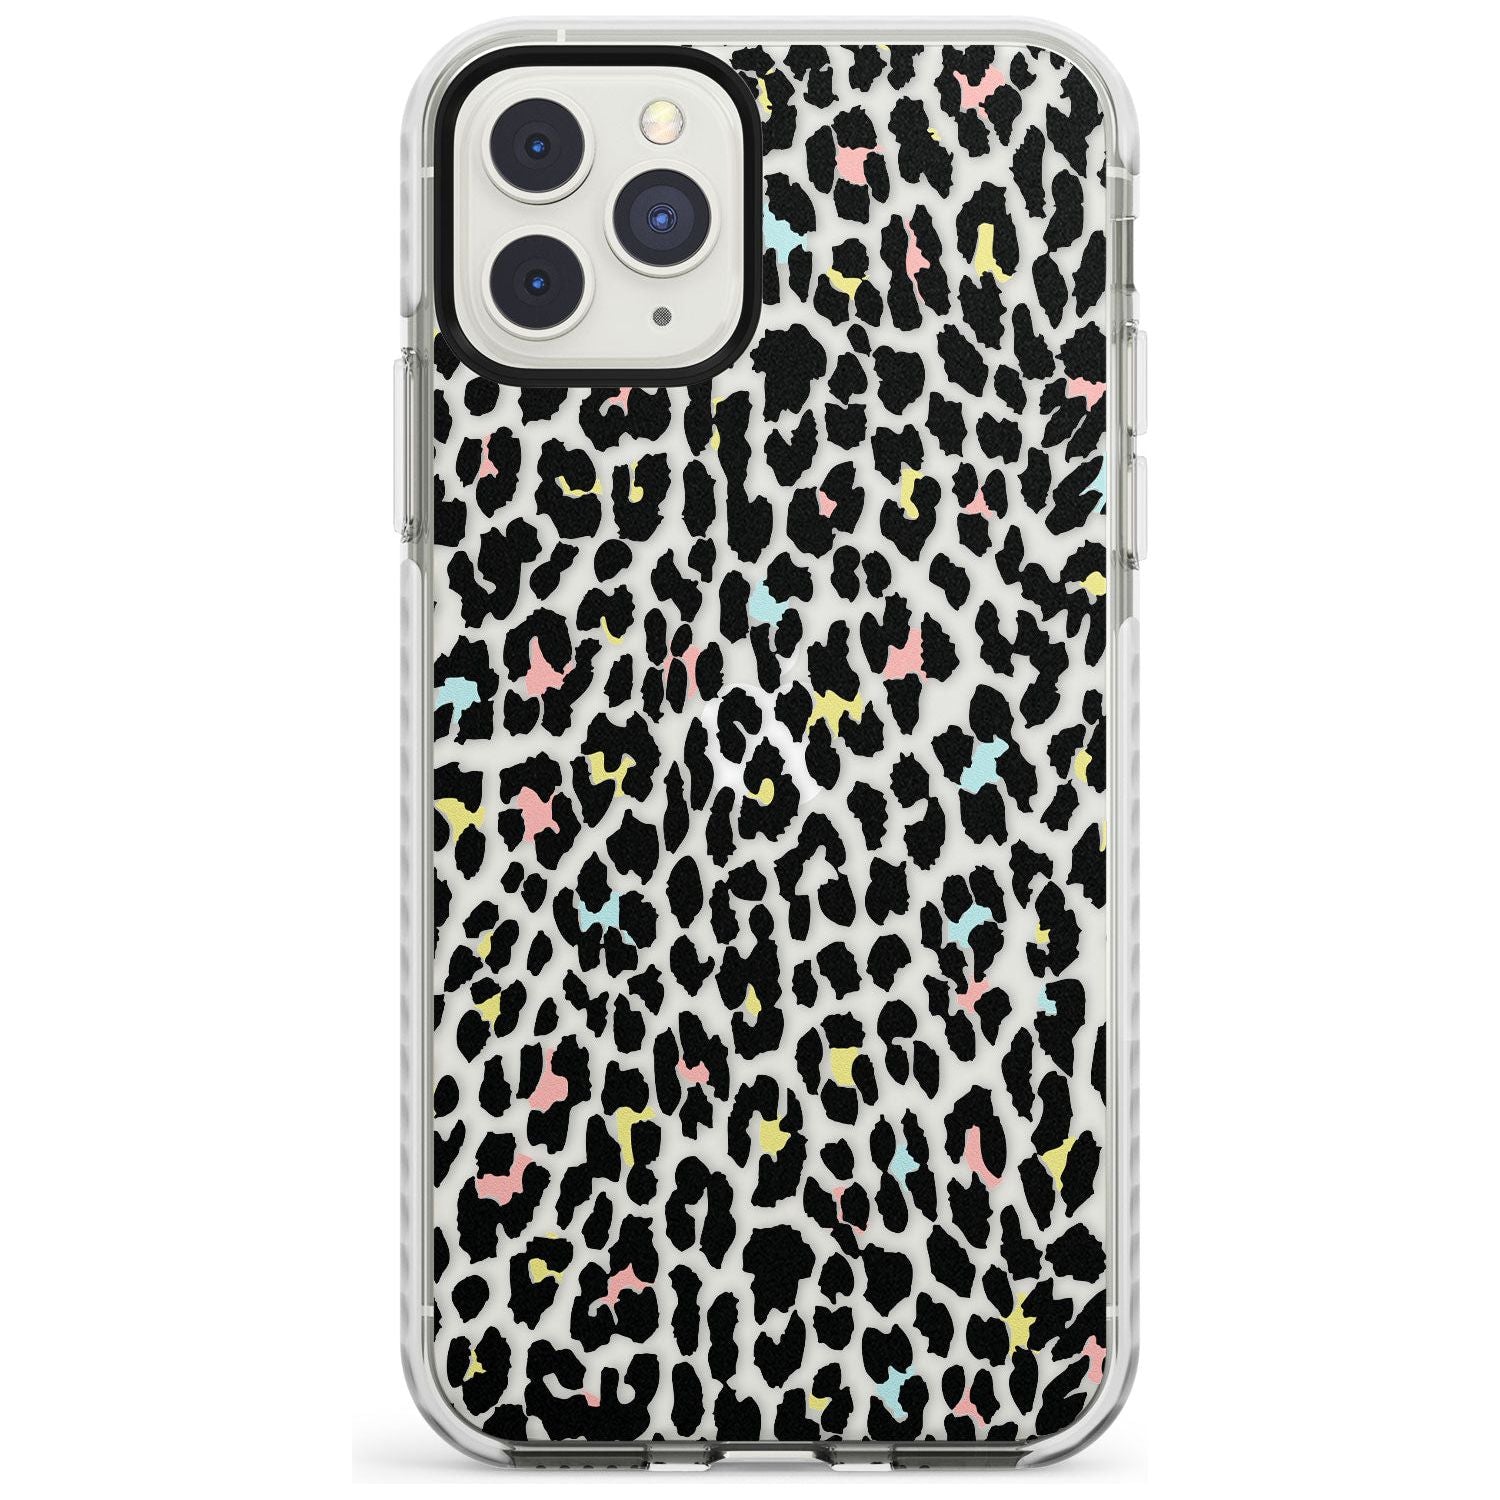 Mixed Pastels Leopard Print - Transparent Impact Phone Case for iPhone 11 Pro Max